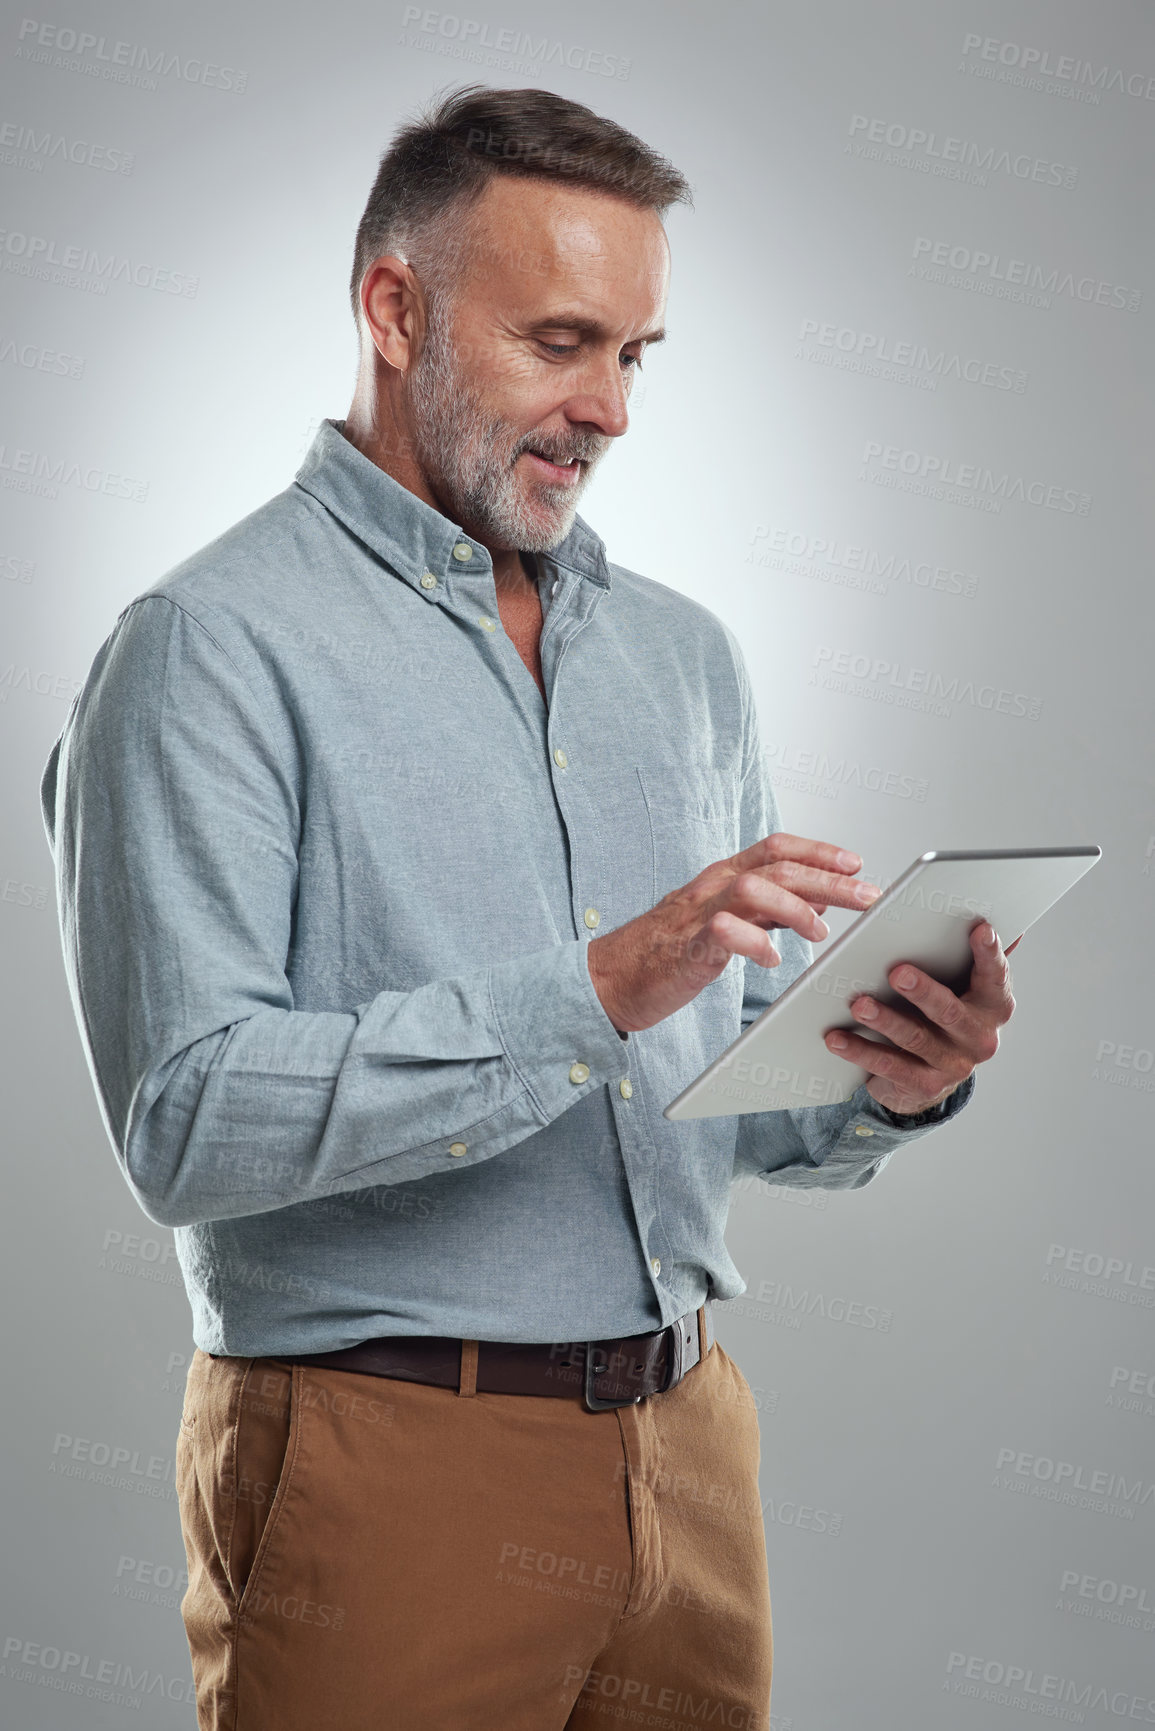 Buy stock photo Studio shot of a mature man using a digital tablet against a grey background